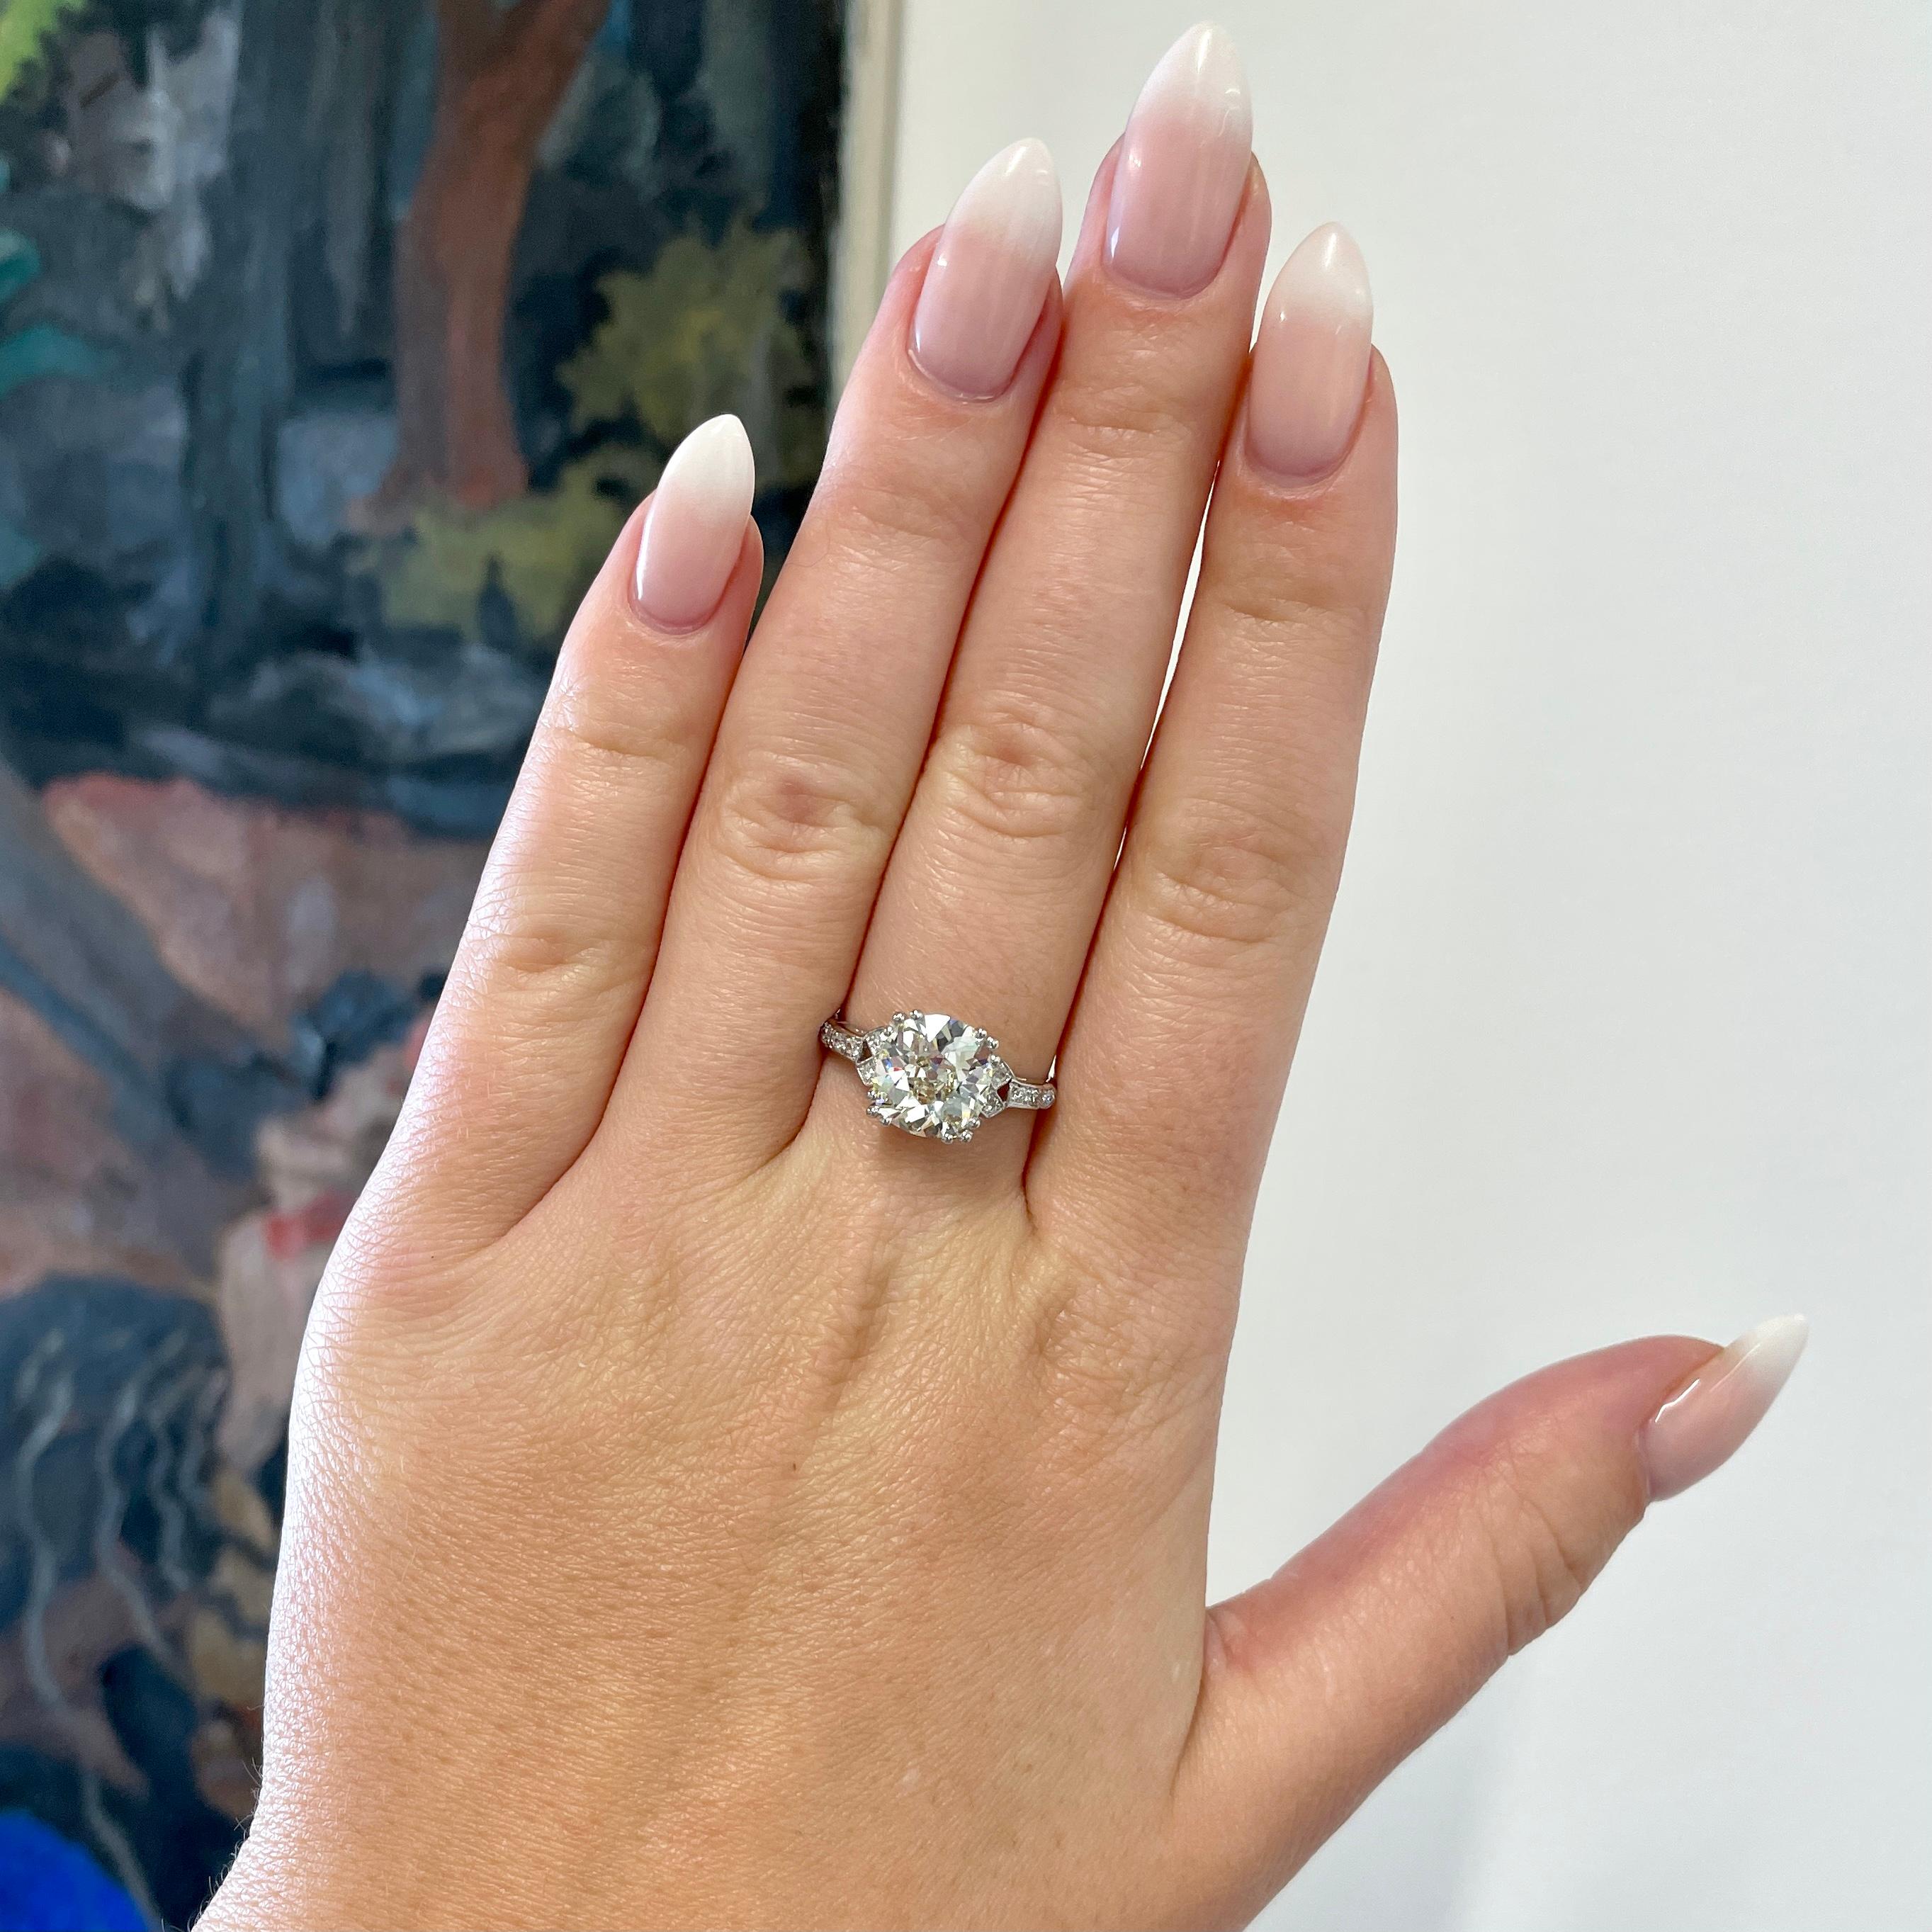 Are you looking for the perfect antique engagement ring? Consider this intricate Art Deco GIA 3.11 carat Cushion Cut Diamond Platinum Engagement Ring. Vibrant, bright and full of life. 

The center stone is GIA certified 3.11 carat antique cushion